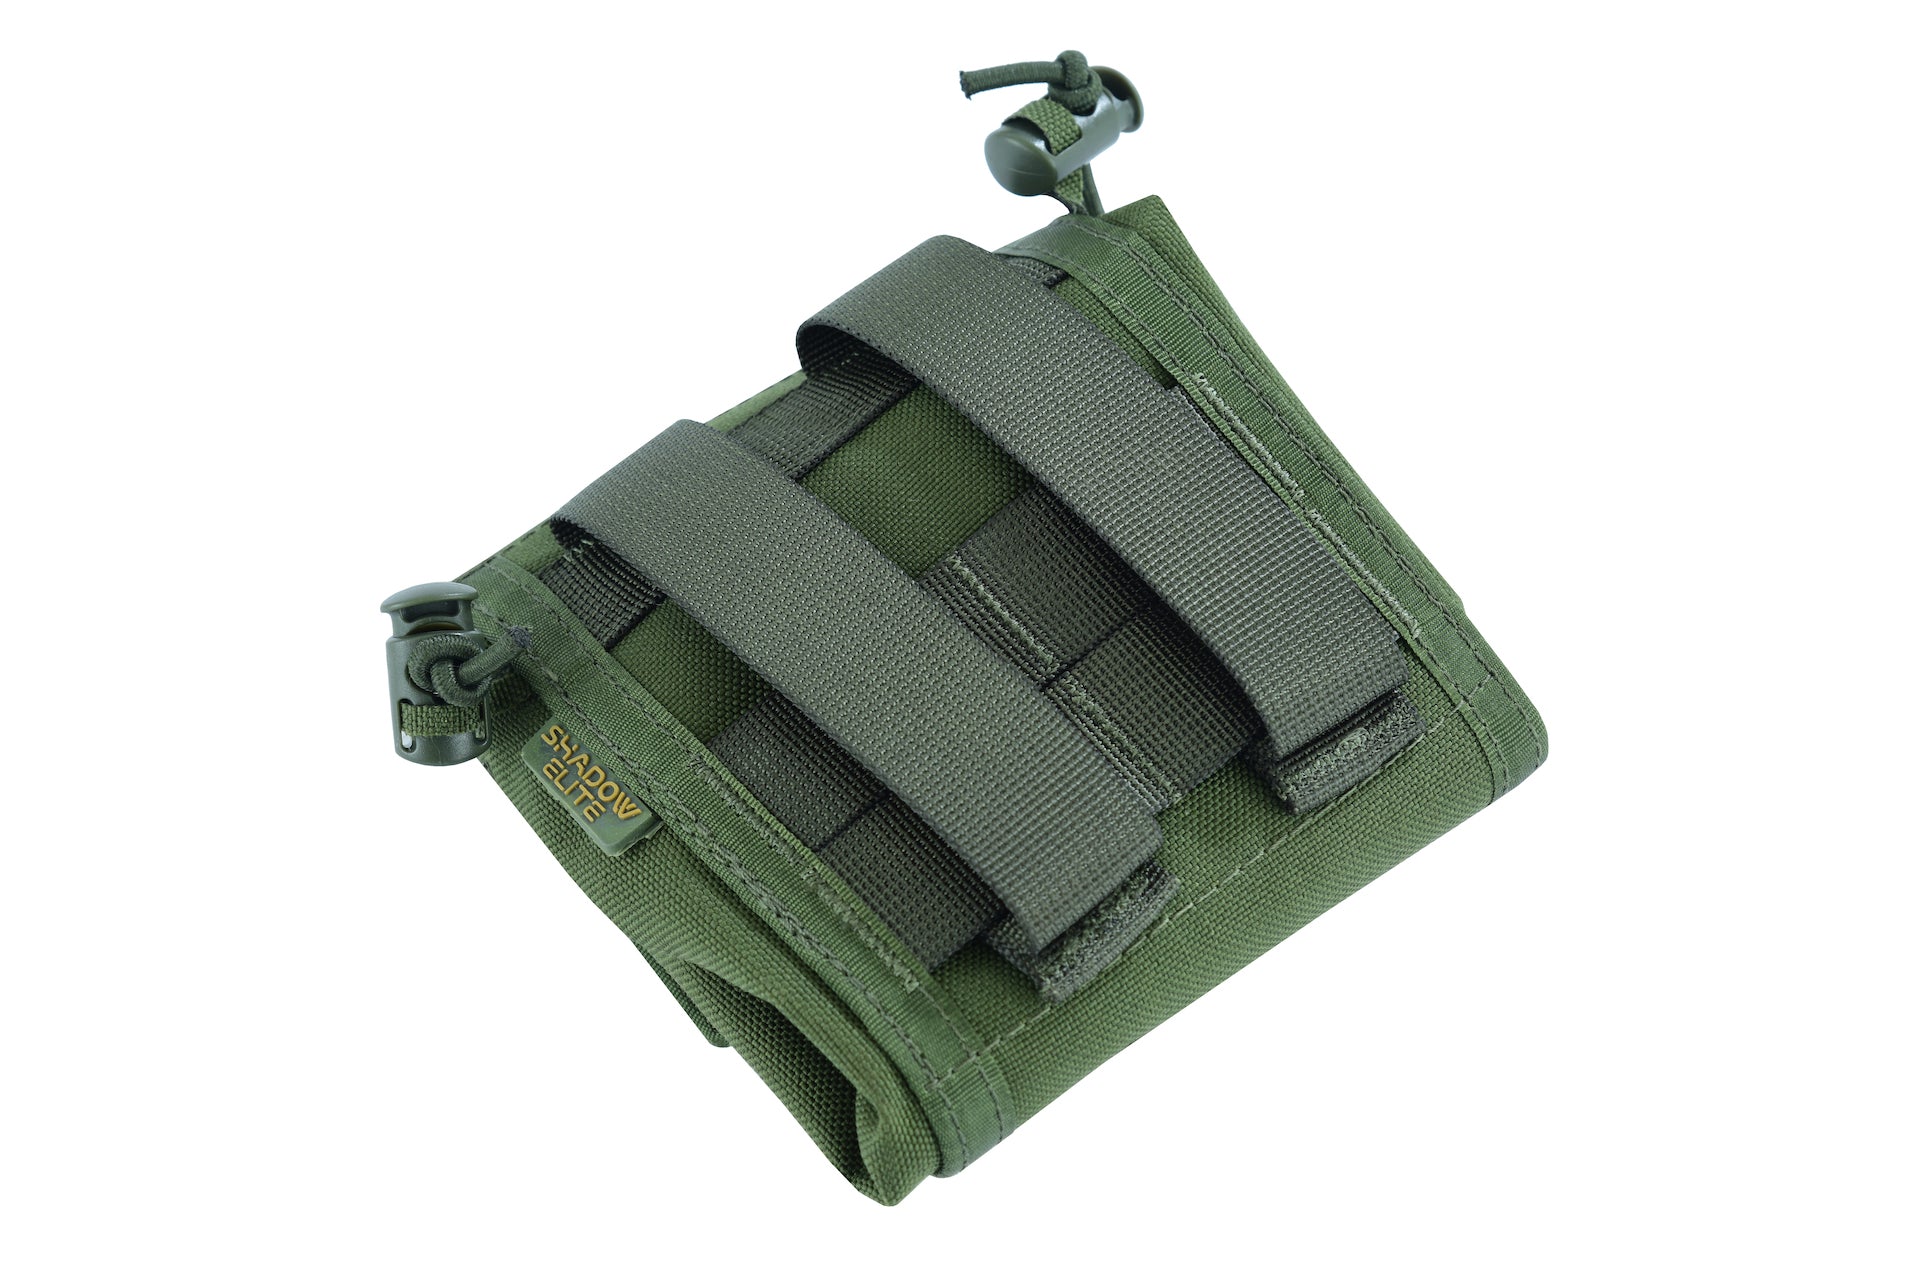 SHE-806 Molle Folding Dump pouch Color Olive Green.